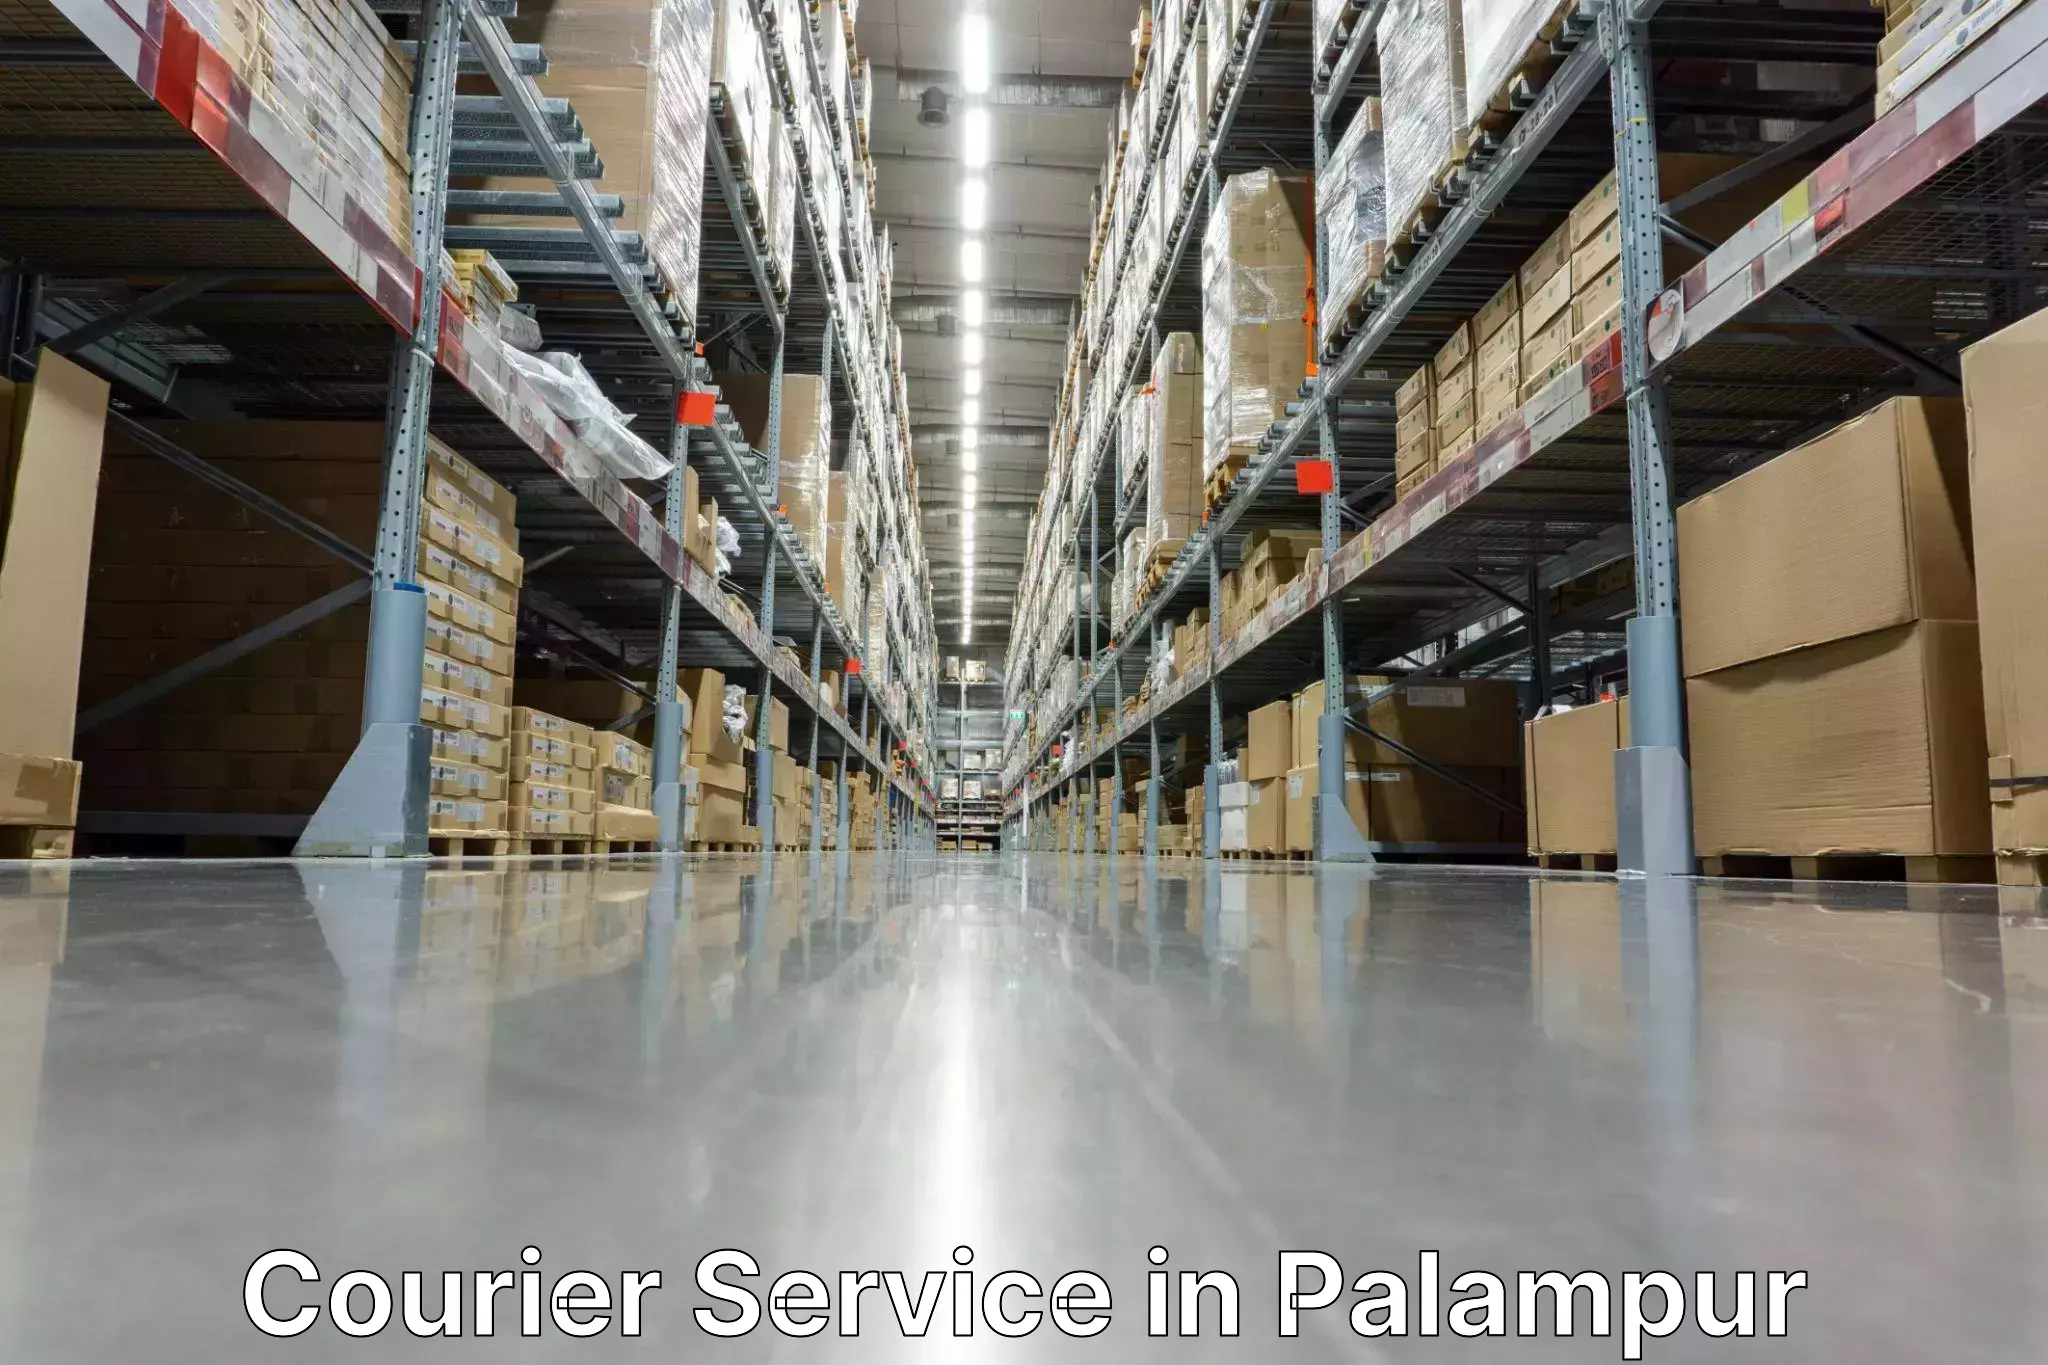 Advanced parcel tracking in Palampur